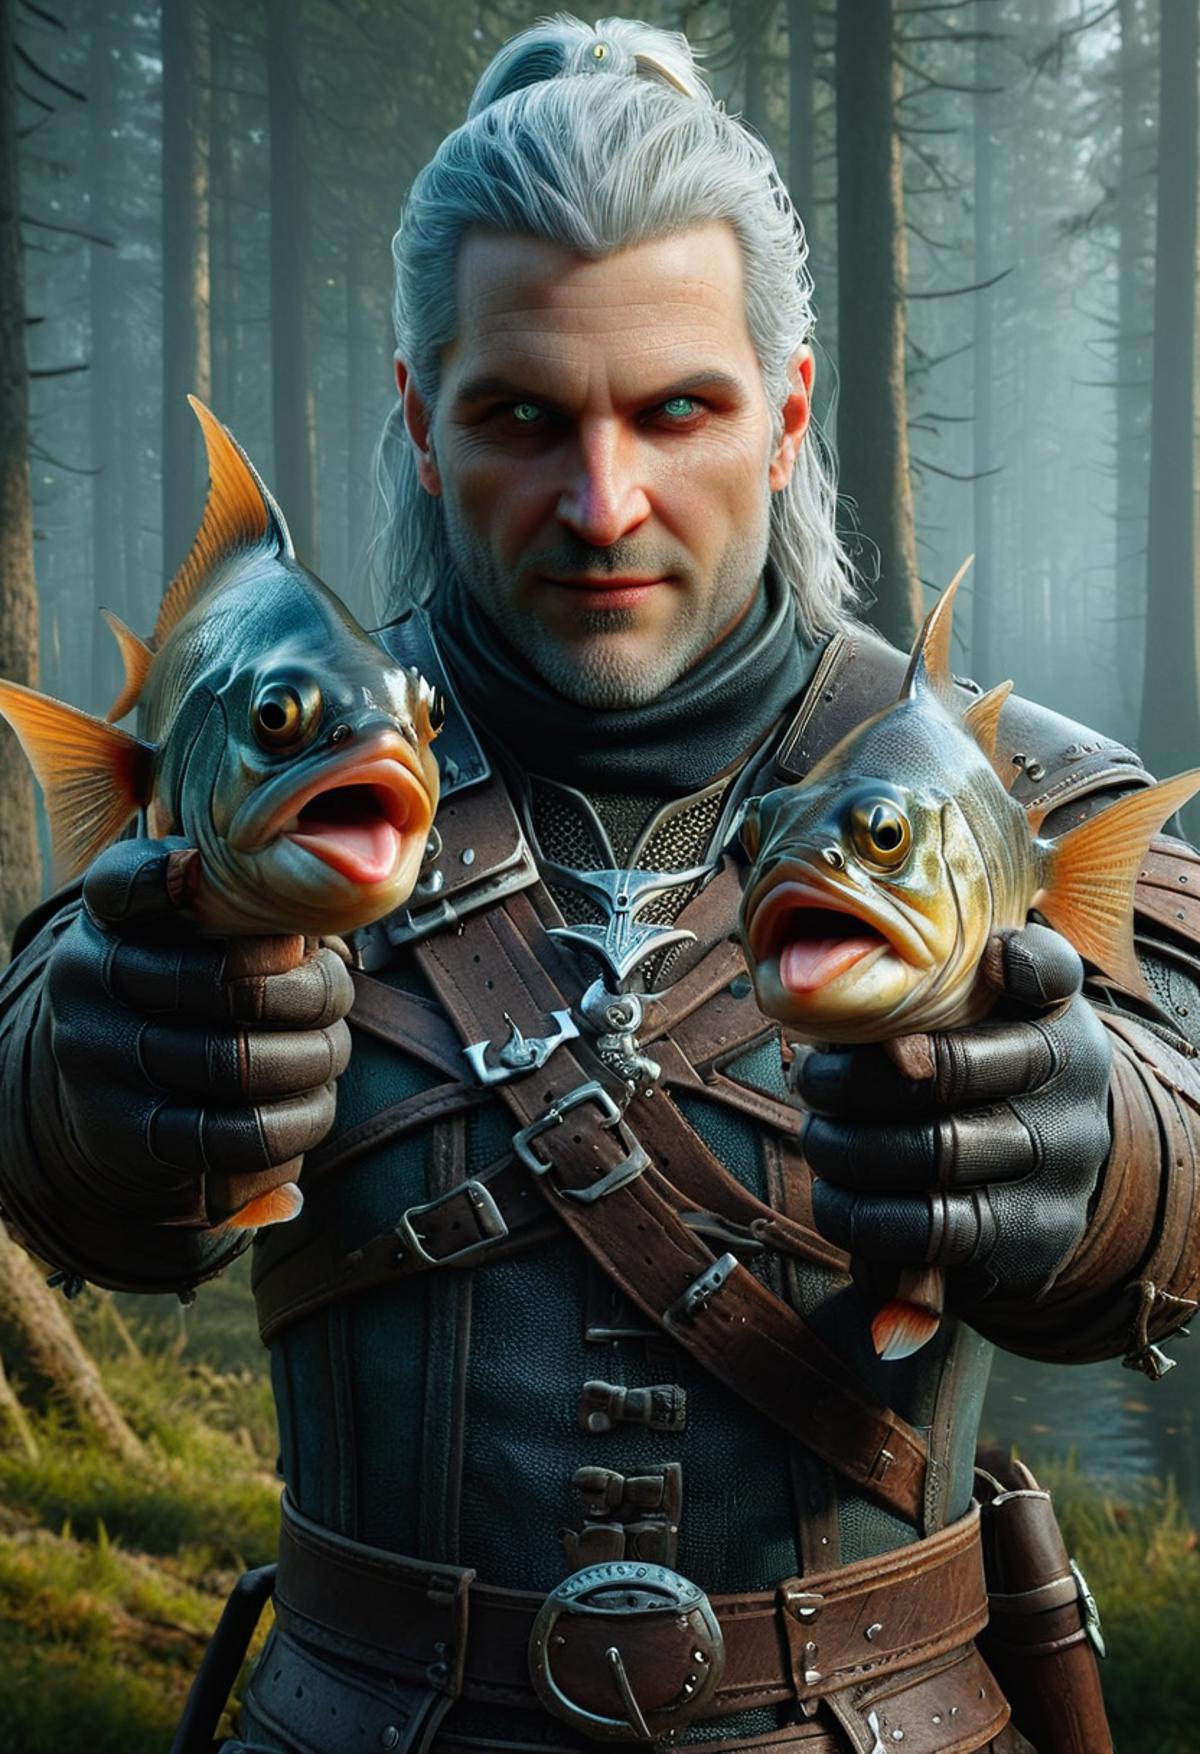 A man holding two fish with big teeth and wide open mouths, possibly a video game character.